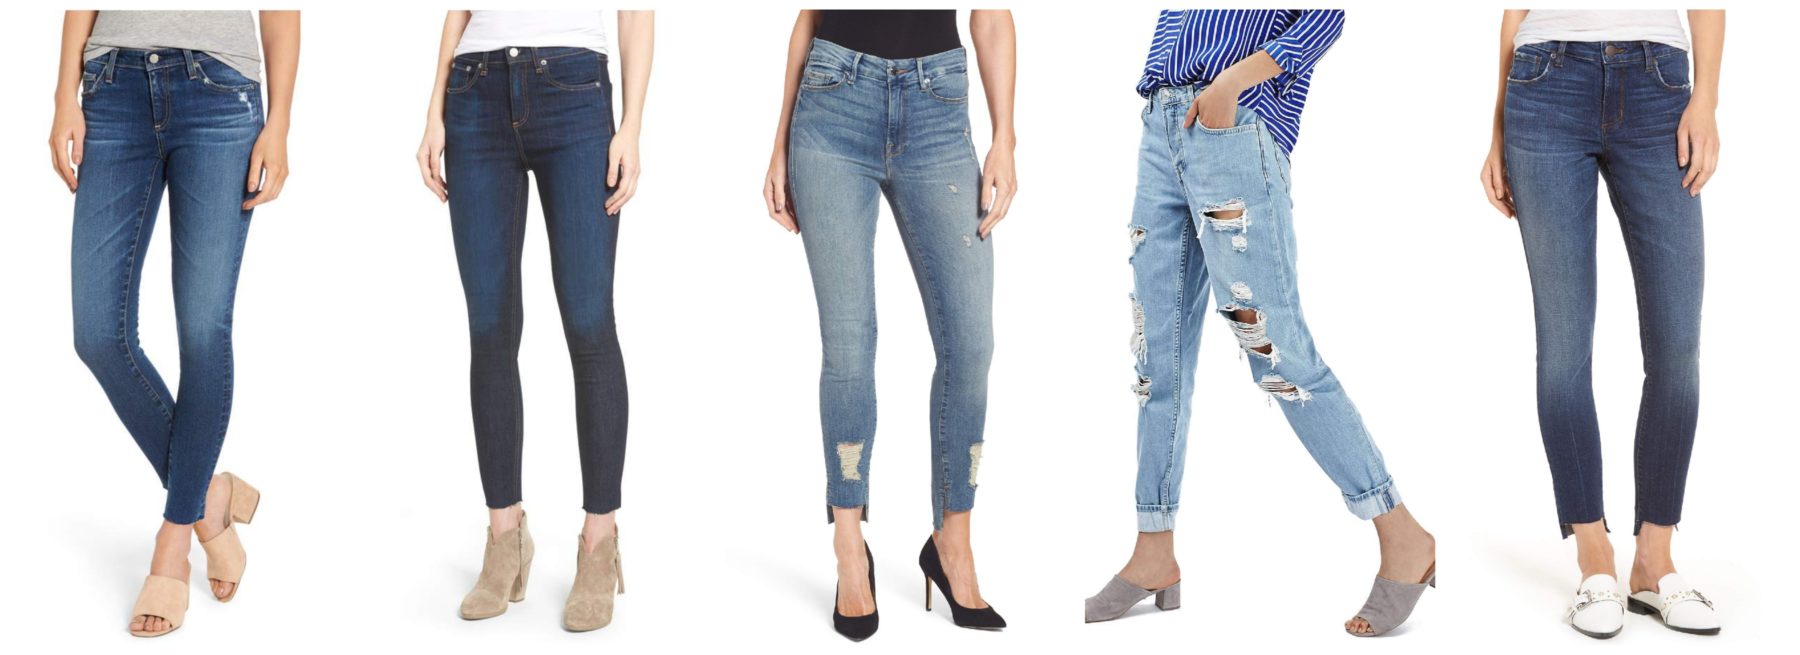 nordstrom jeans on sale - Best of the Weekend Sales by popular Dallas petite fashion blogger cute & little